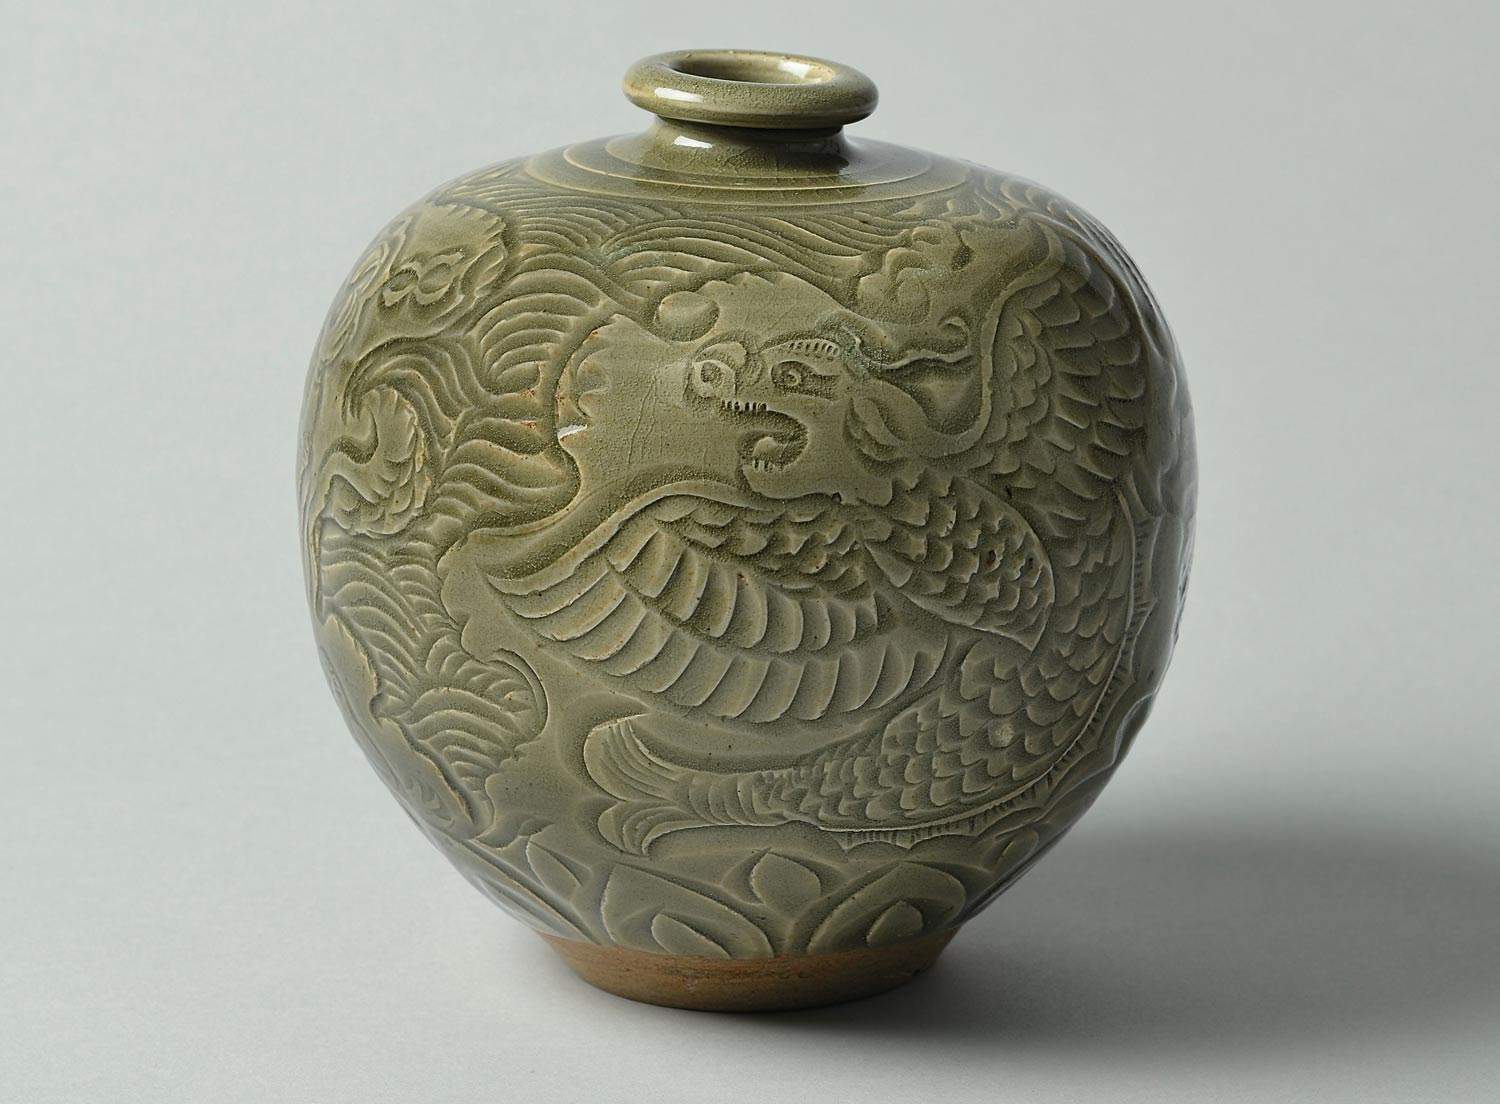 Venice, at the Museum of Oriental Art the ancient Chinese ceramics from the kilns of Yaozhou